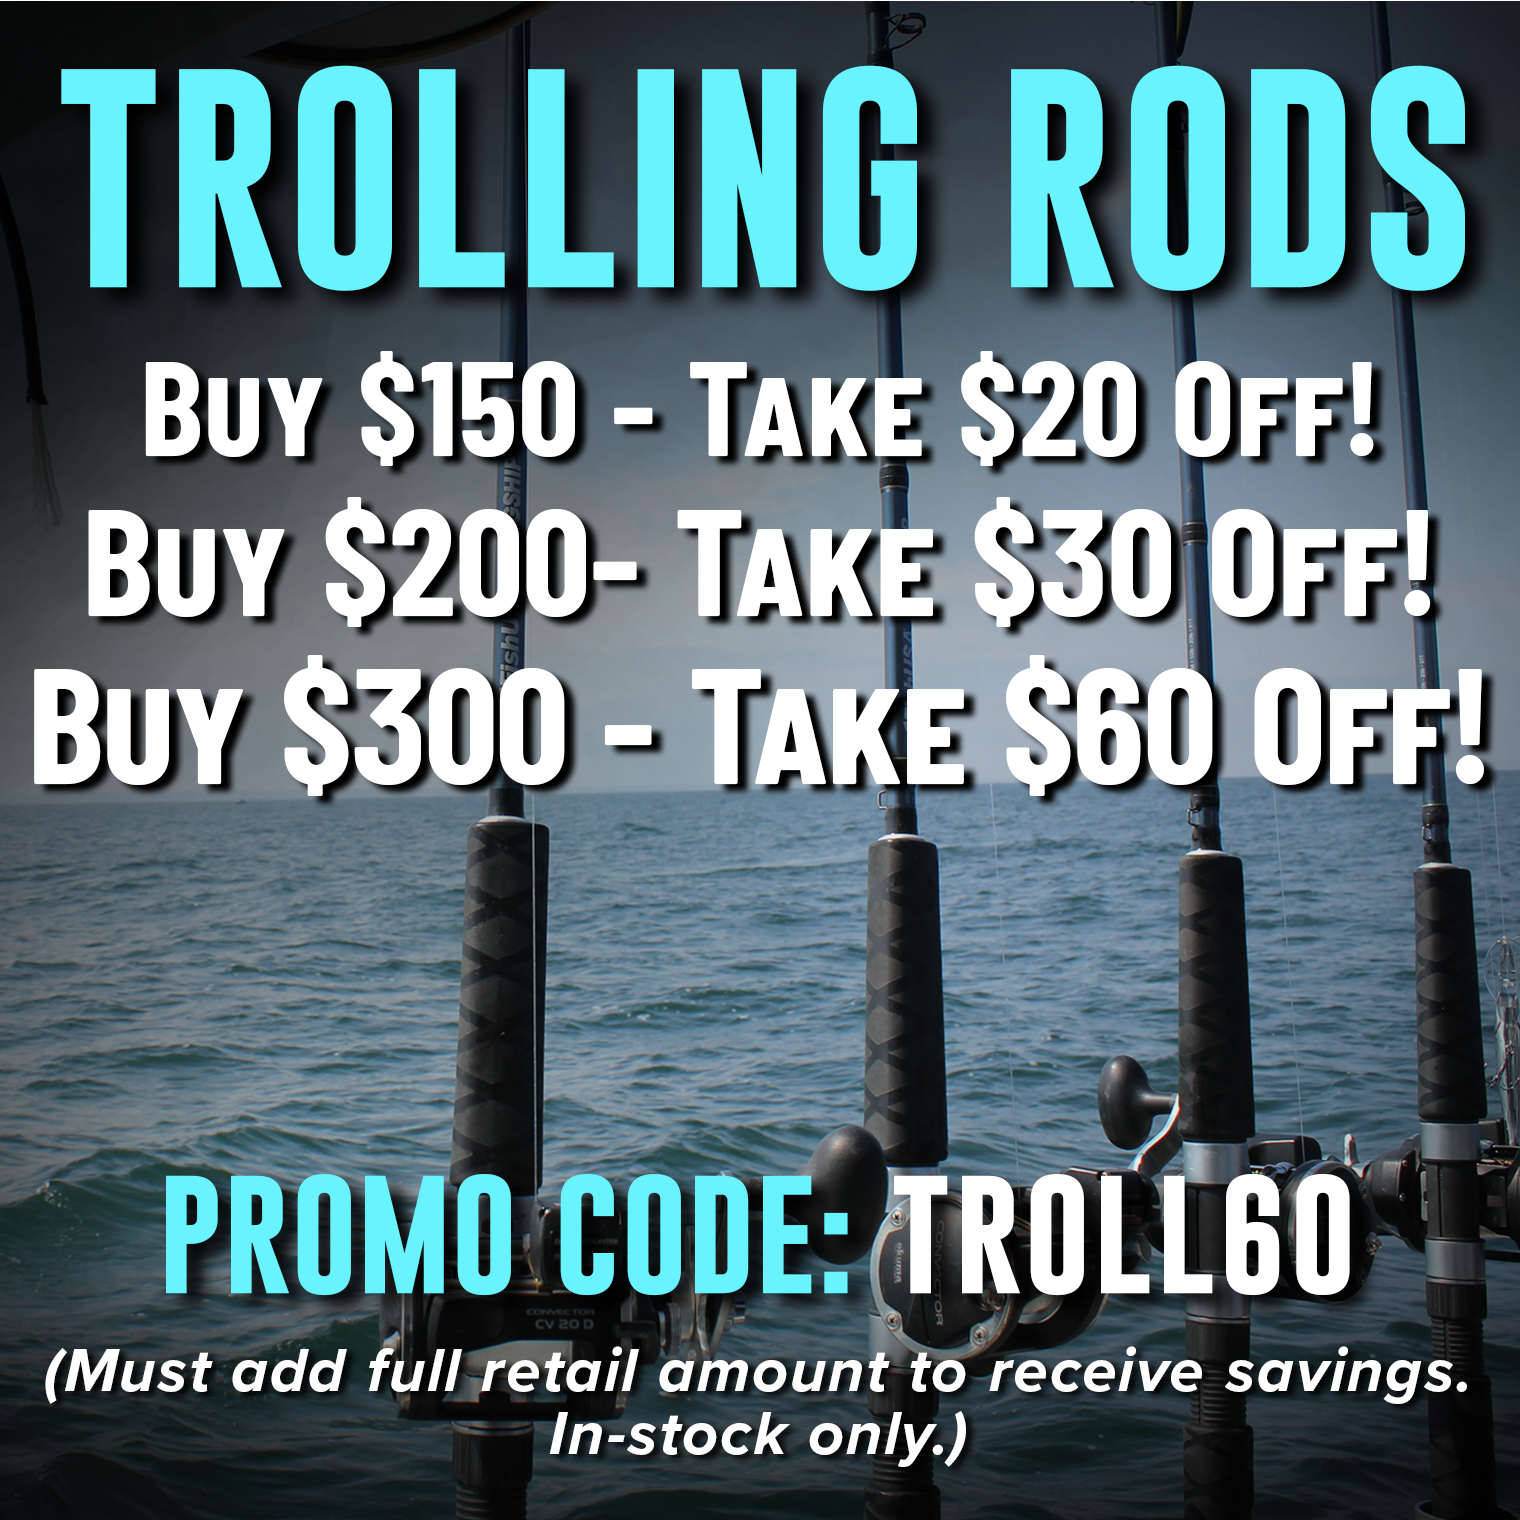 Trolling Rods Buy $150 - Take $20 Off Buy $200 - Take $30 Off! Buy $300 - Take $60 Off! Promo Code: TROLL60 (Must add full retail amount to receive savings. In-stock only.)